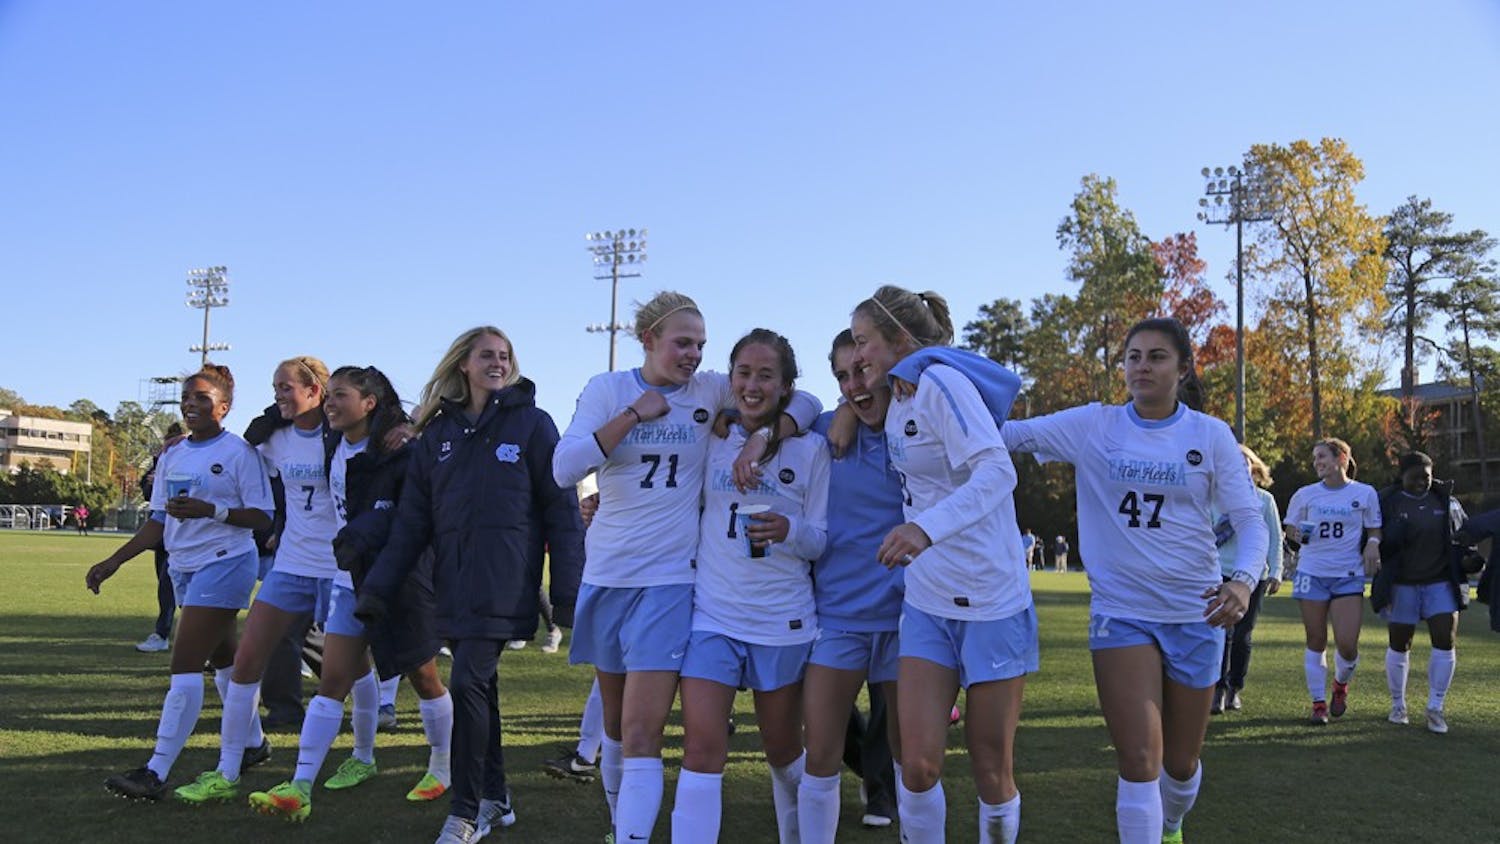 The UNC women's soccer team walks off the field in joy after defeating Clemson 1-0 in the third round of the NCAA tournament on Sunday.